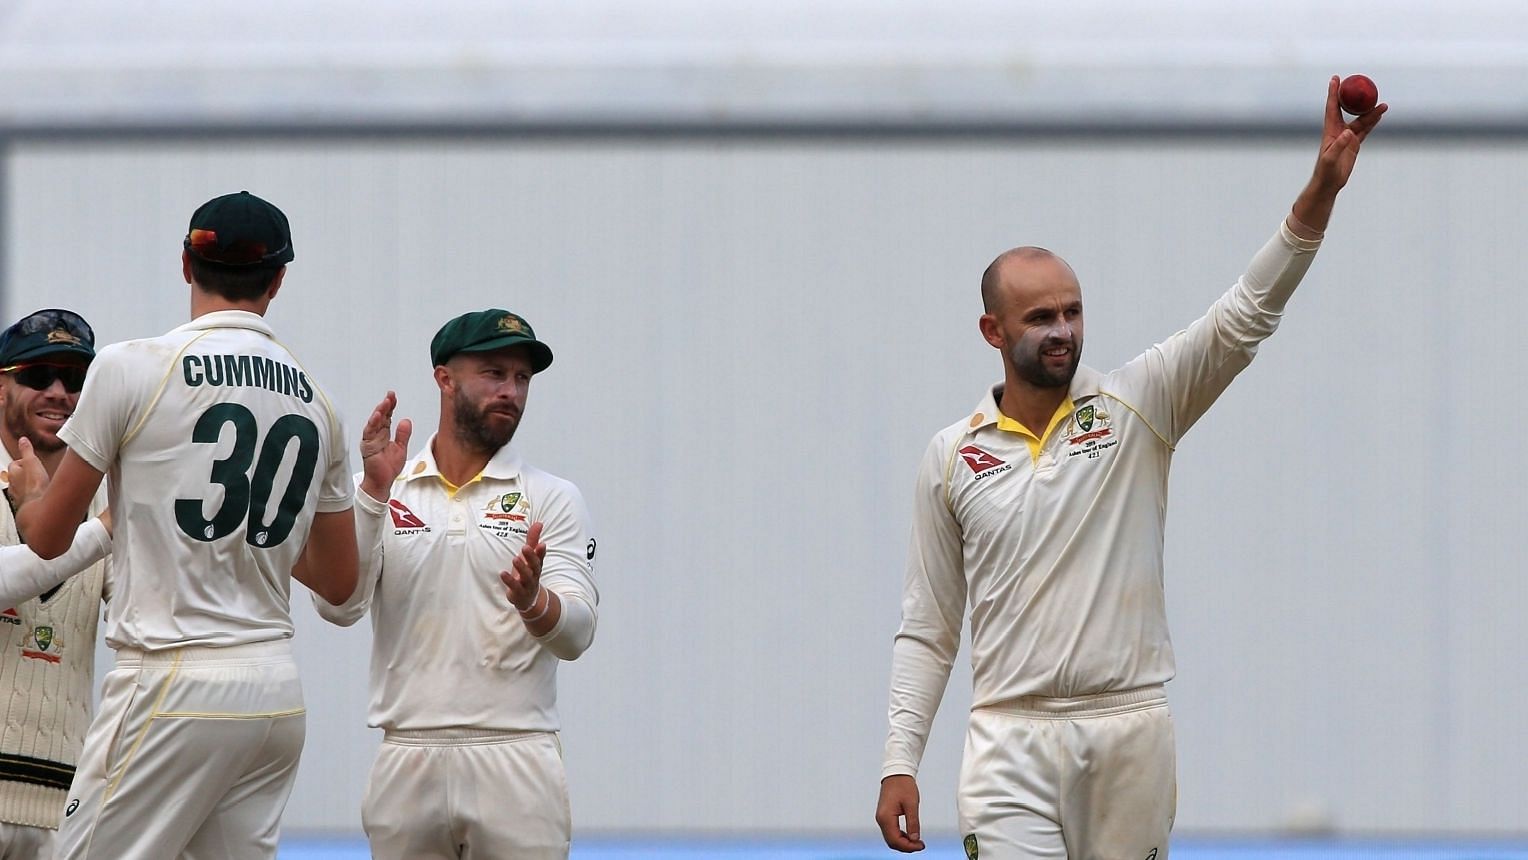 Australia may play the Sydney Test with just Nathan Lyon.